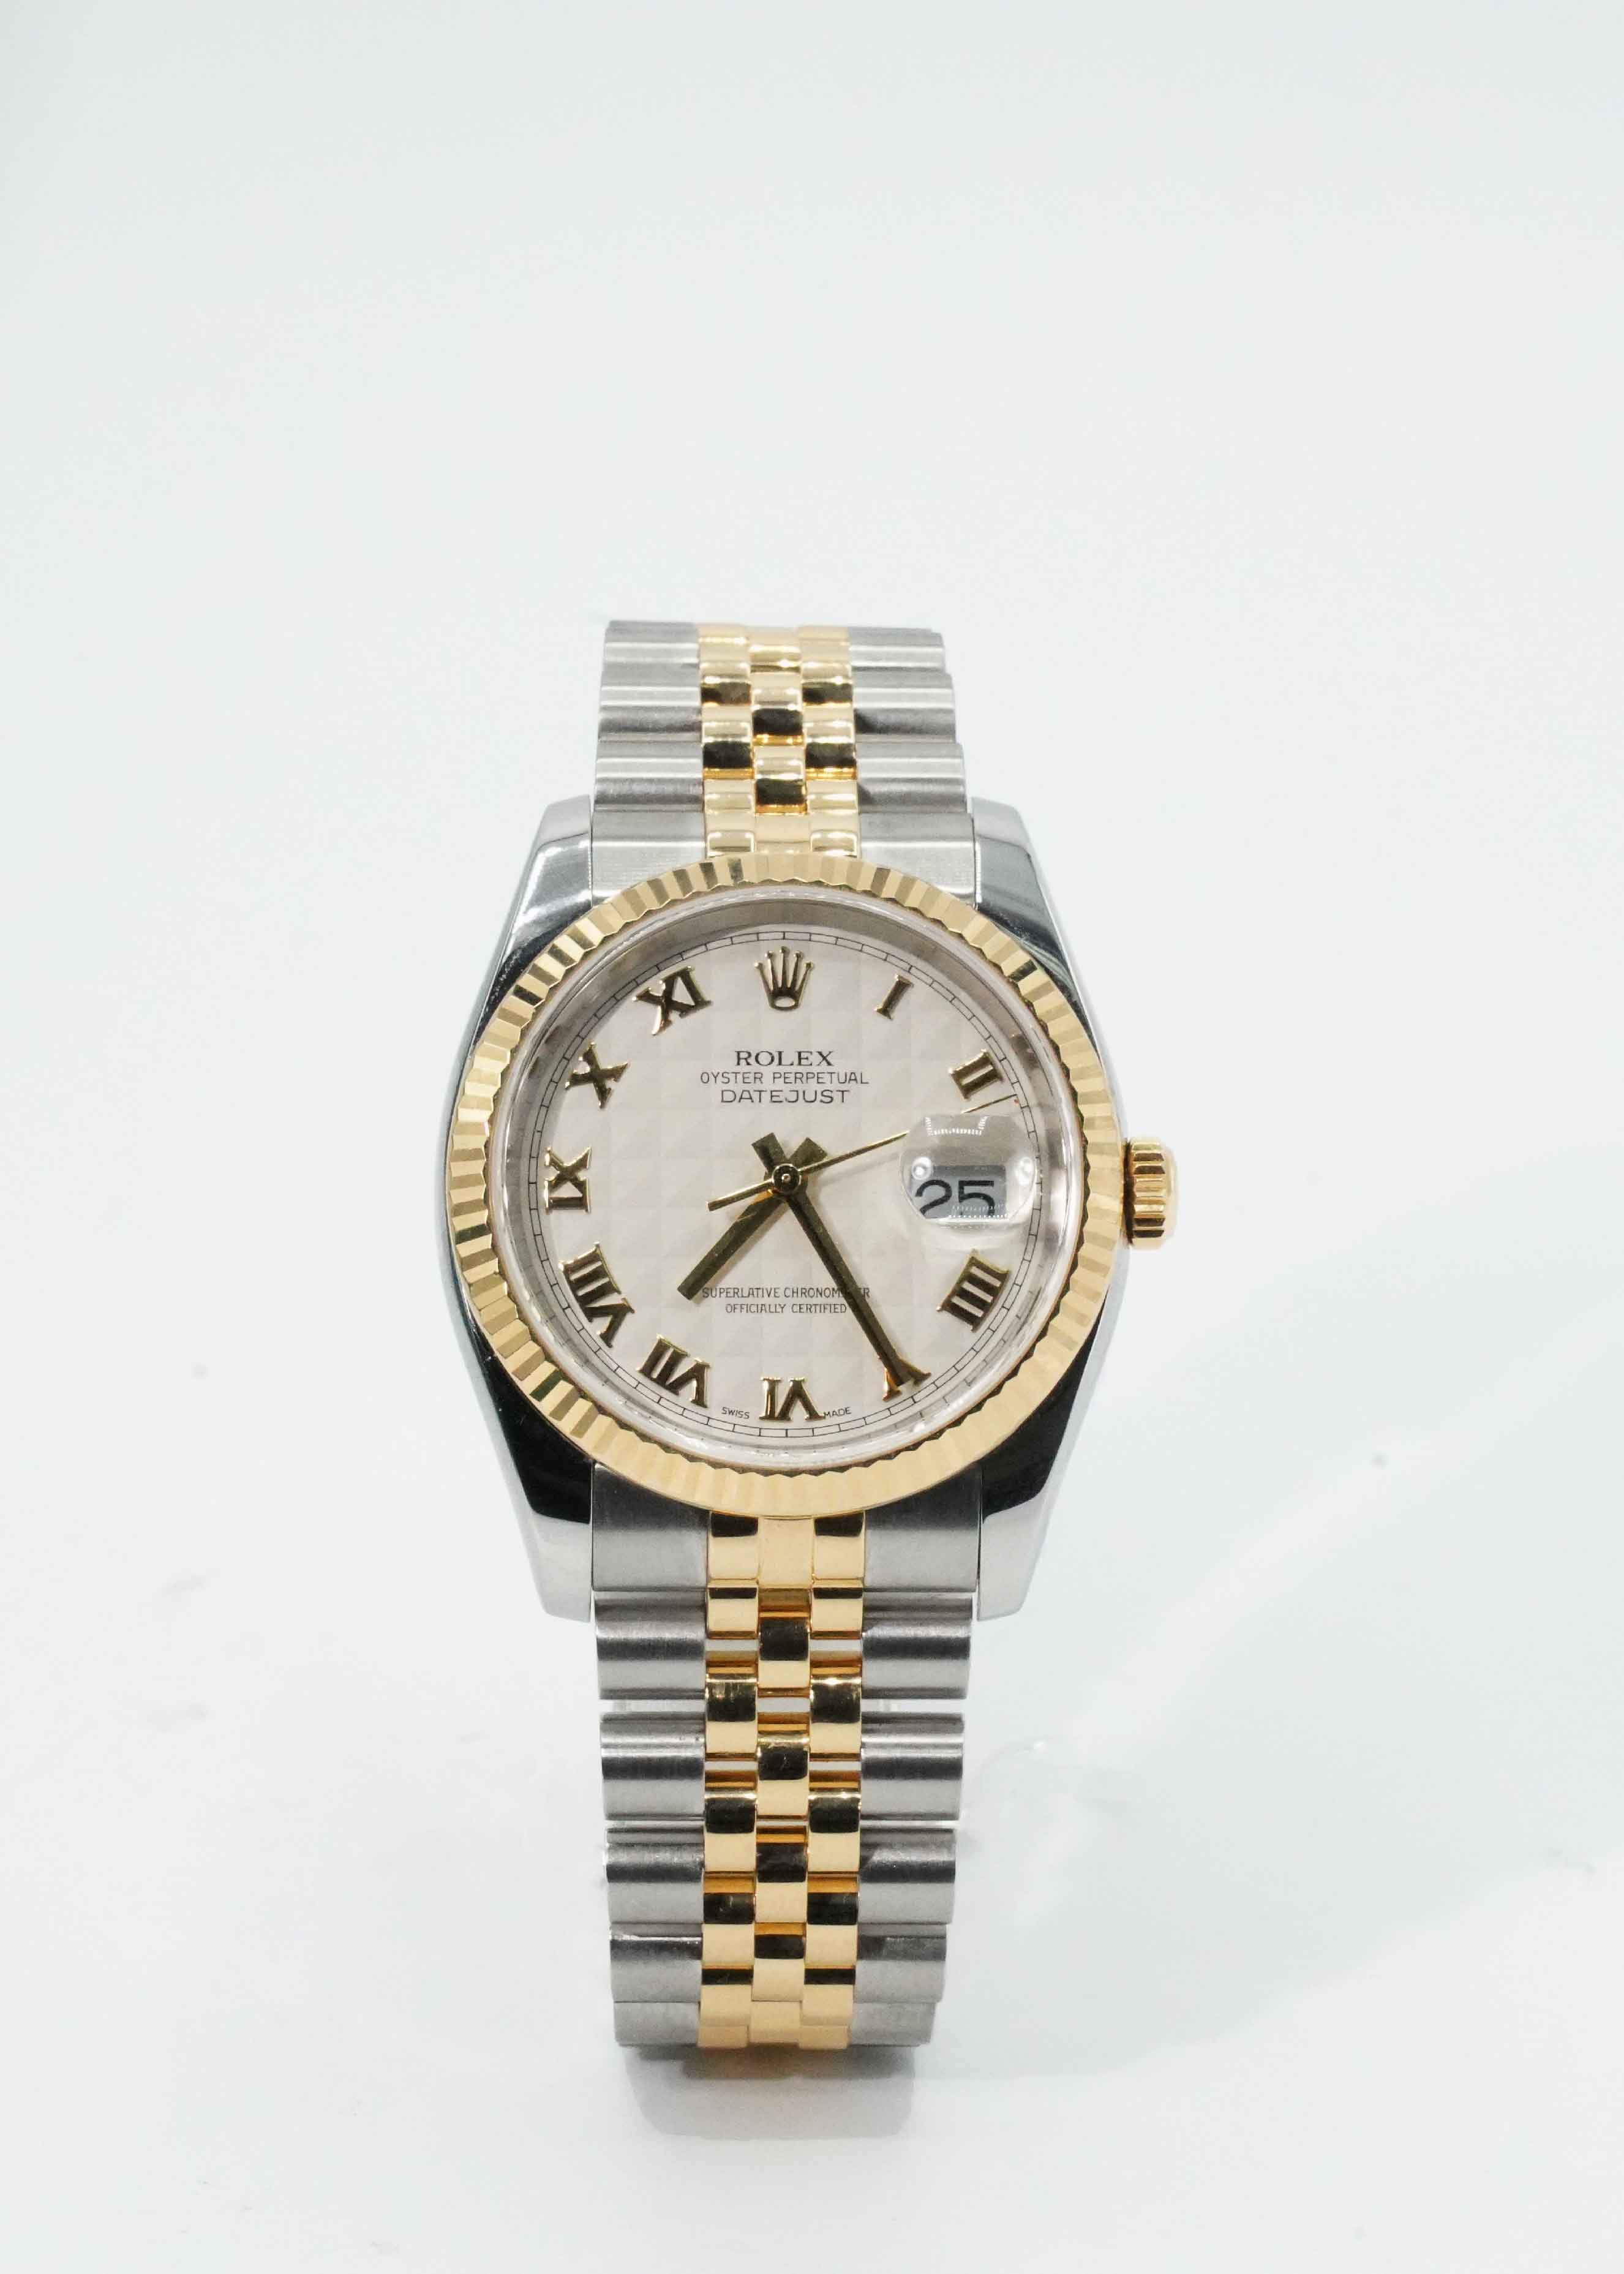 Rolex 36MM 18K Date Just Pyramid Dial Factory 116233 2005